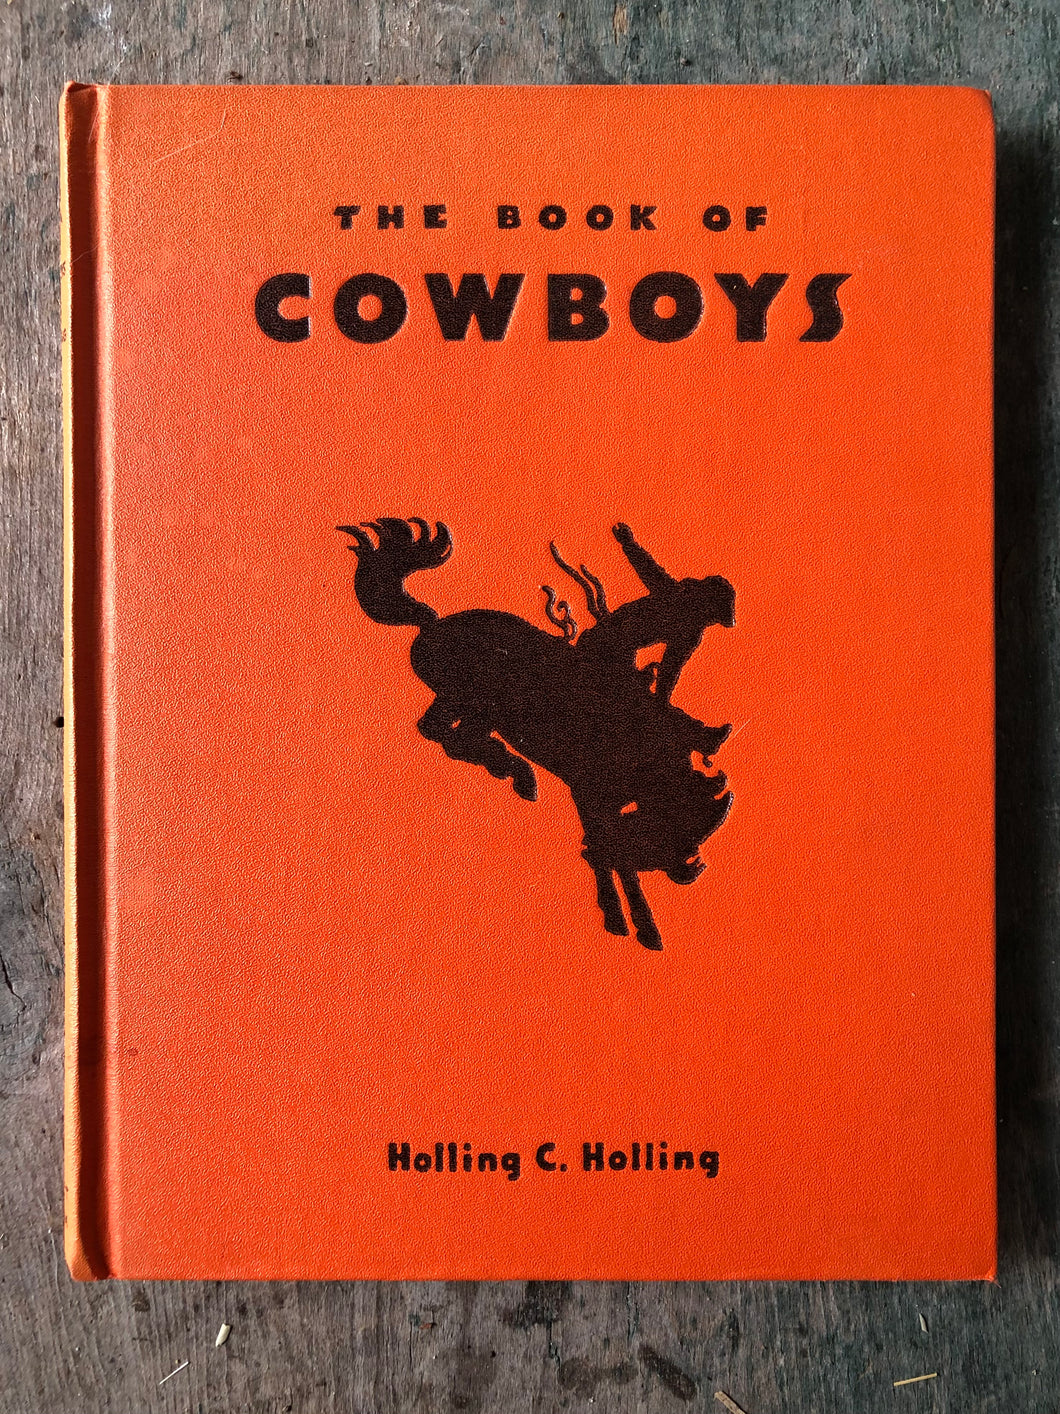 The Book of Cowboys by Holling C. Holling and illustrated by H. C. And Lucille Holling